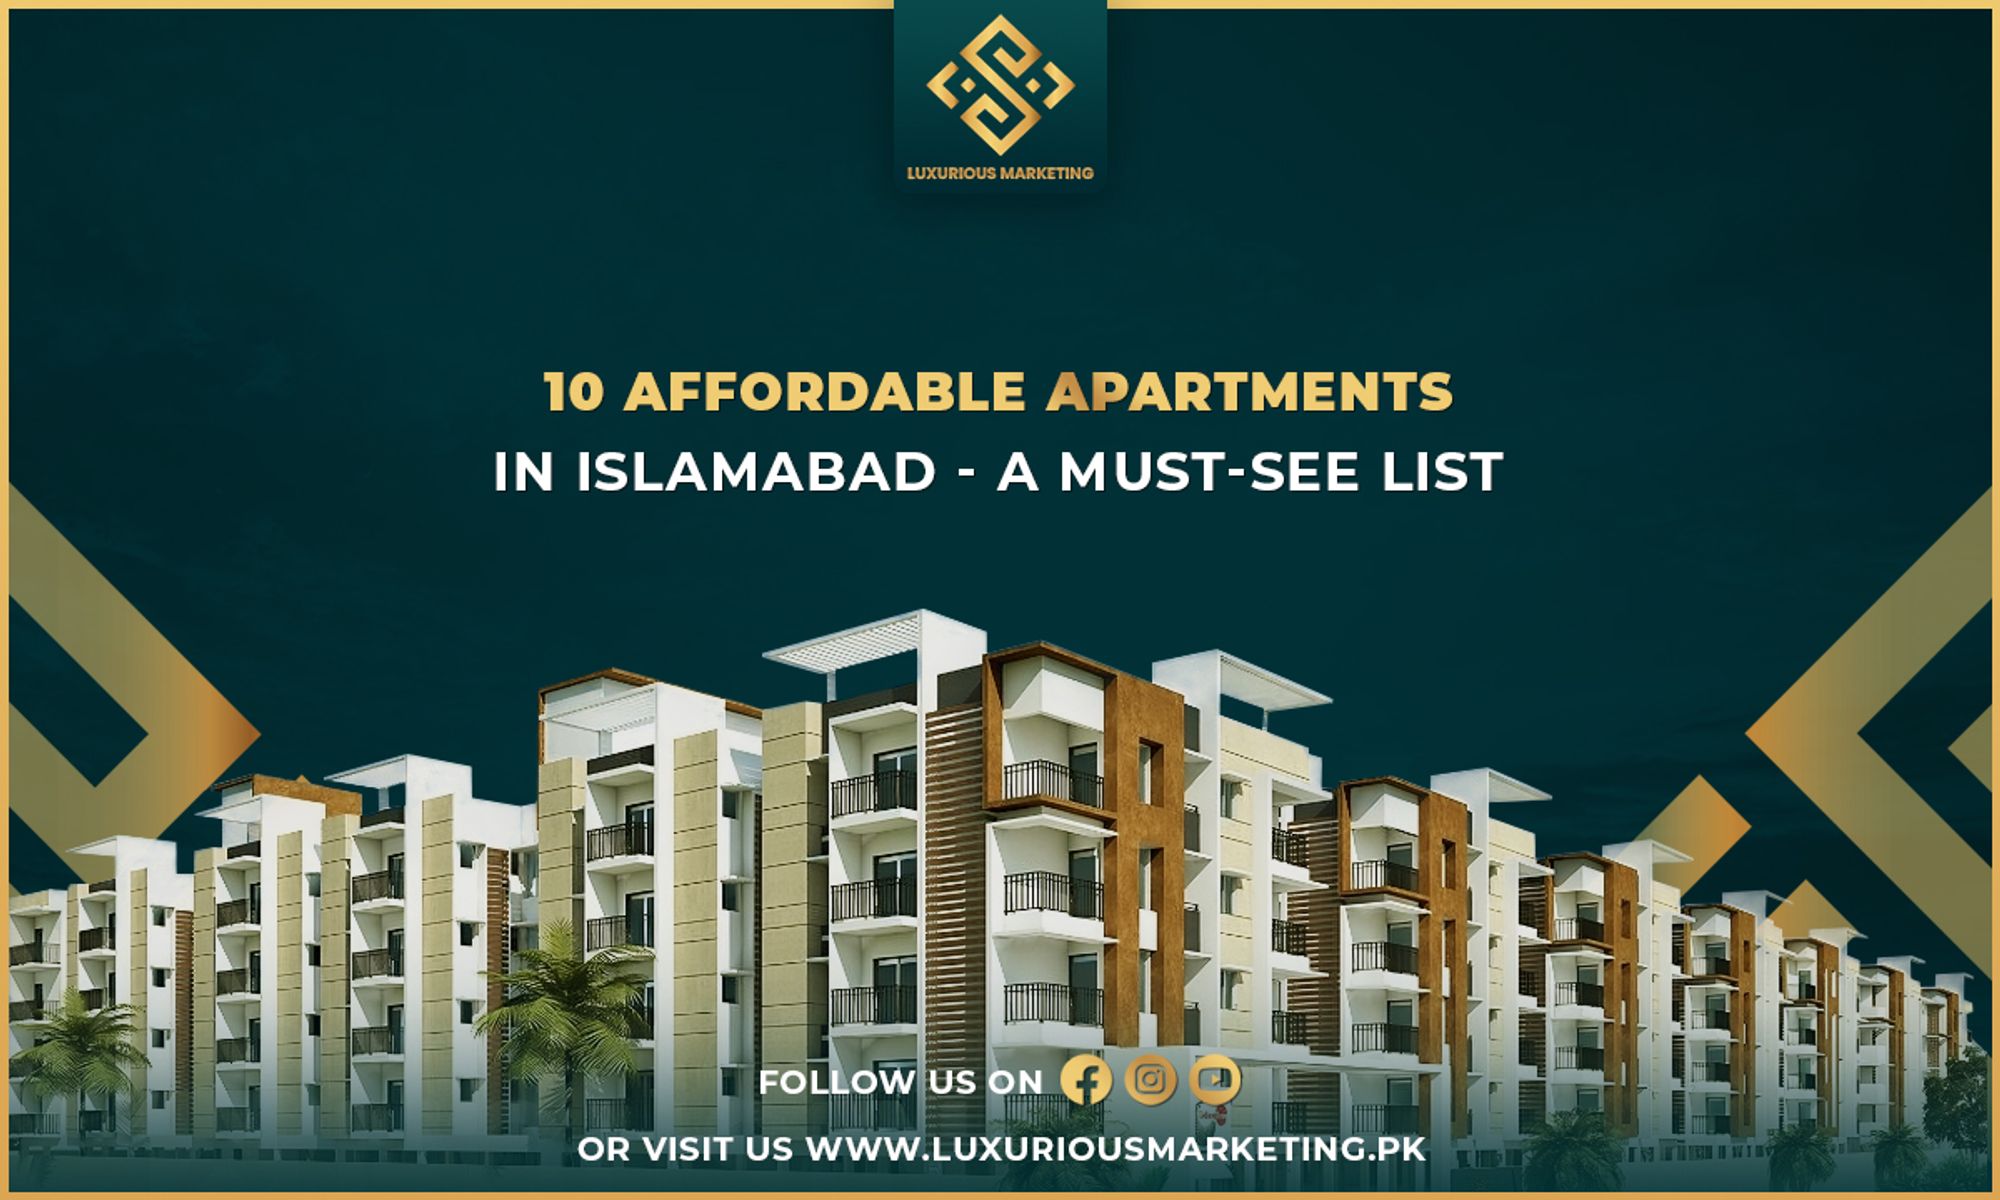 10 Affordable Apartments in Islamabad Blog Banner